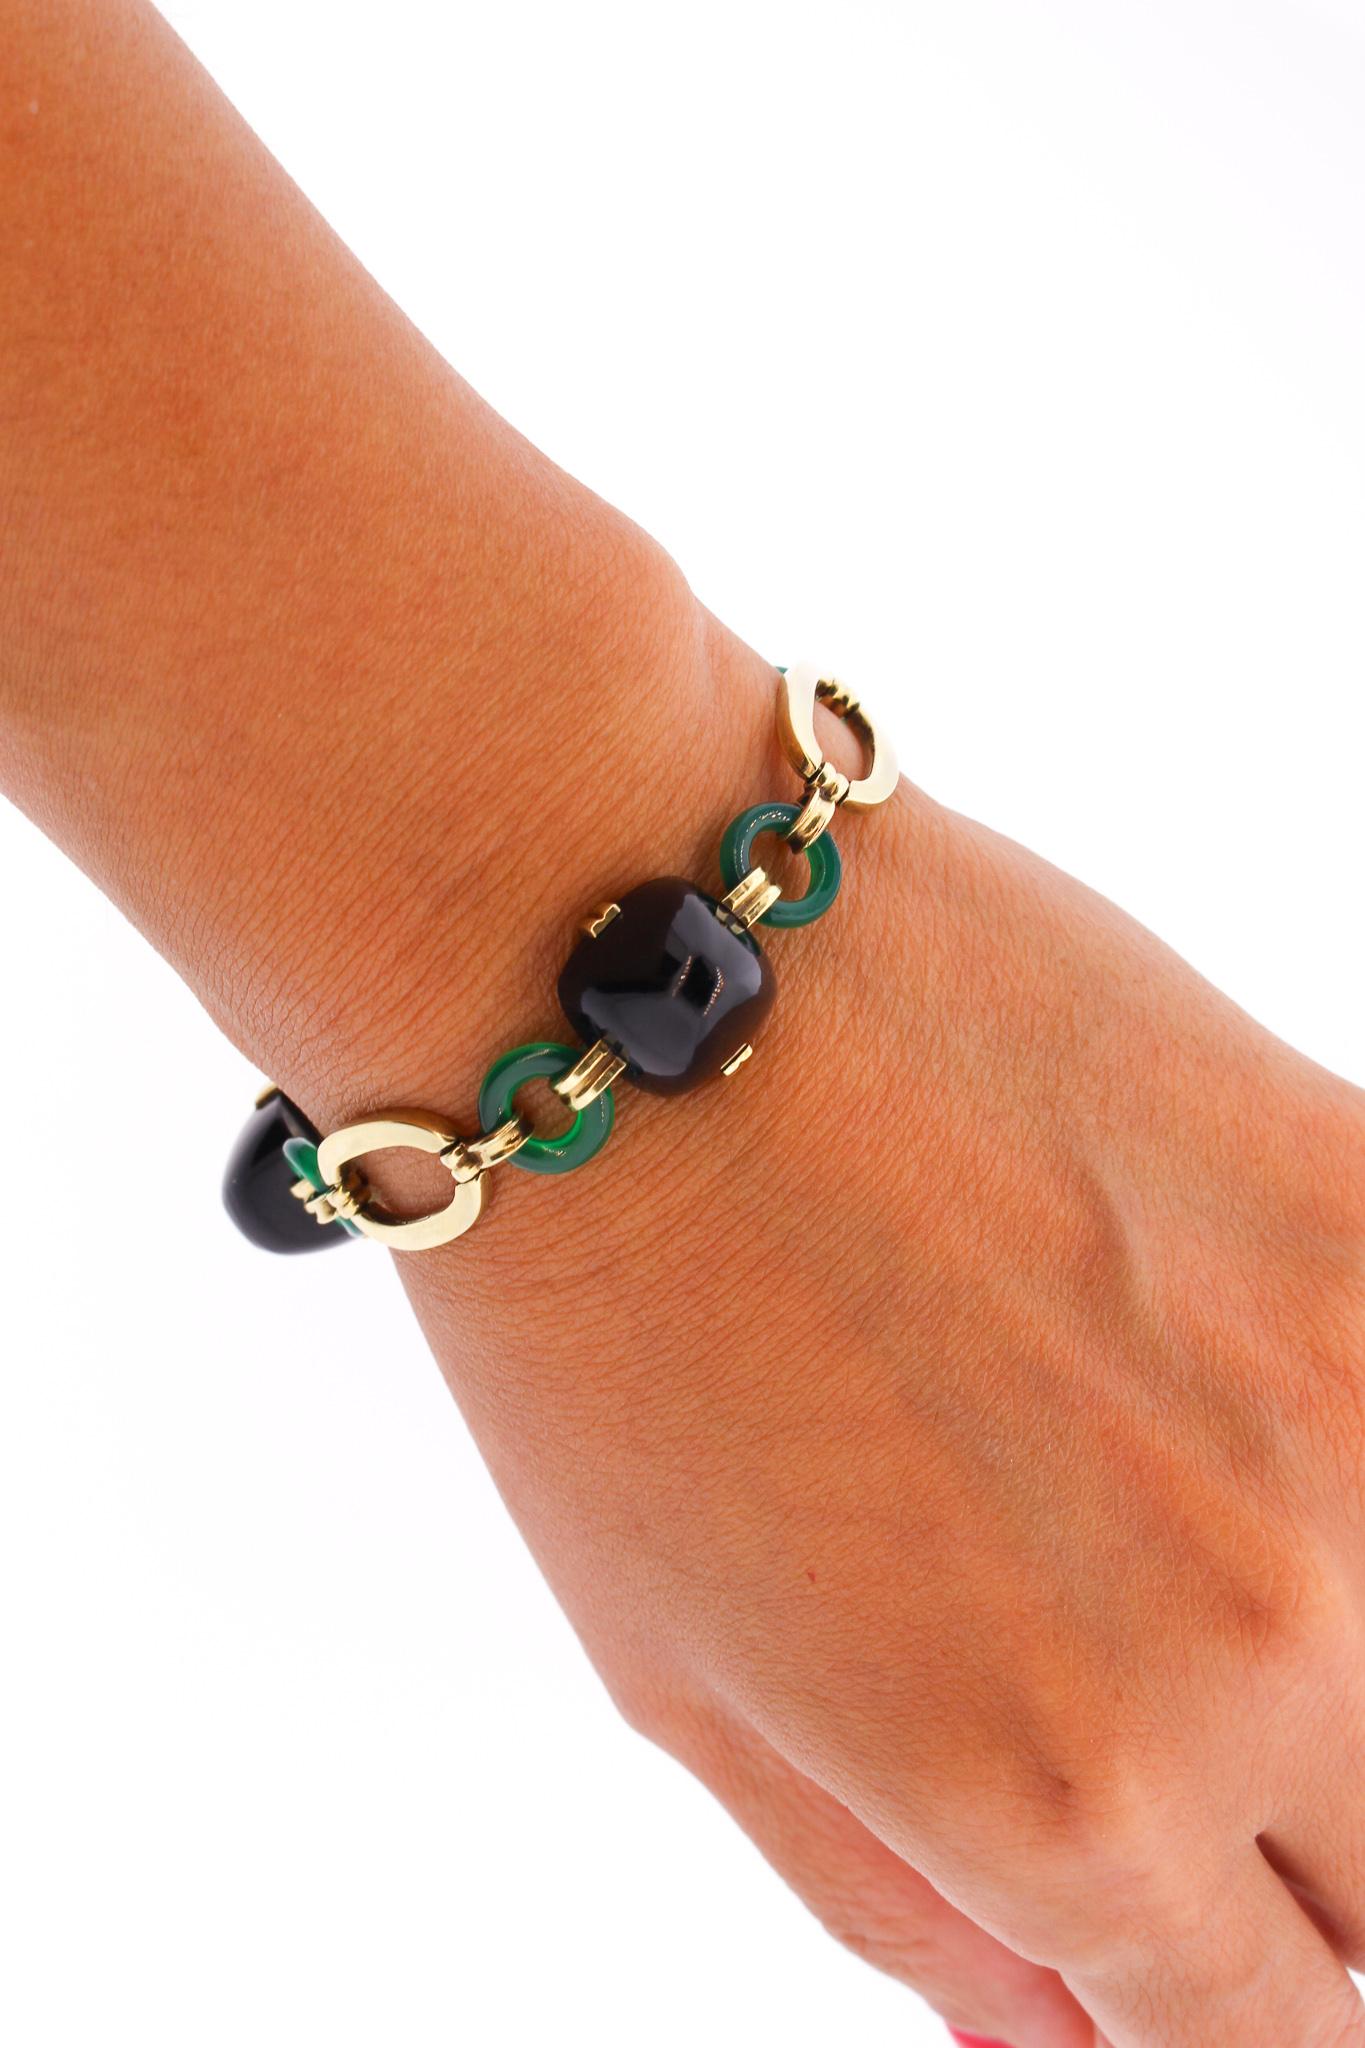 A bold 14k gold Retro era bracelet set with alternating oval gold links, round chrysoprase and sugarloaf onyx sections. The bracelet also features a handsome pattern of alternating oval flat sections and round links. Sometimes these bracelets are